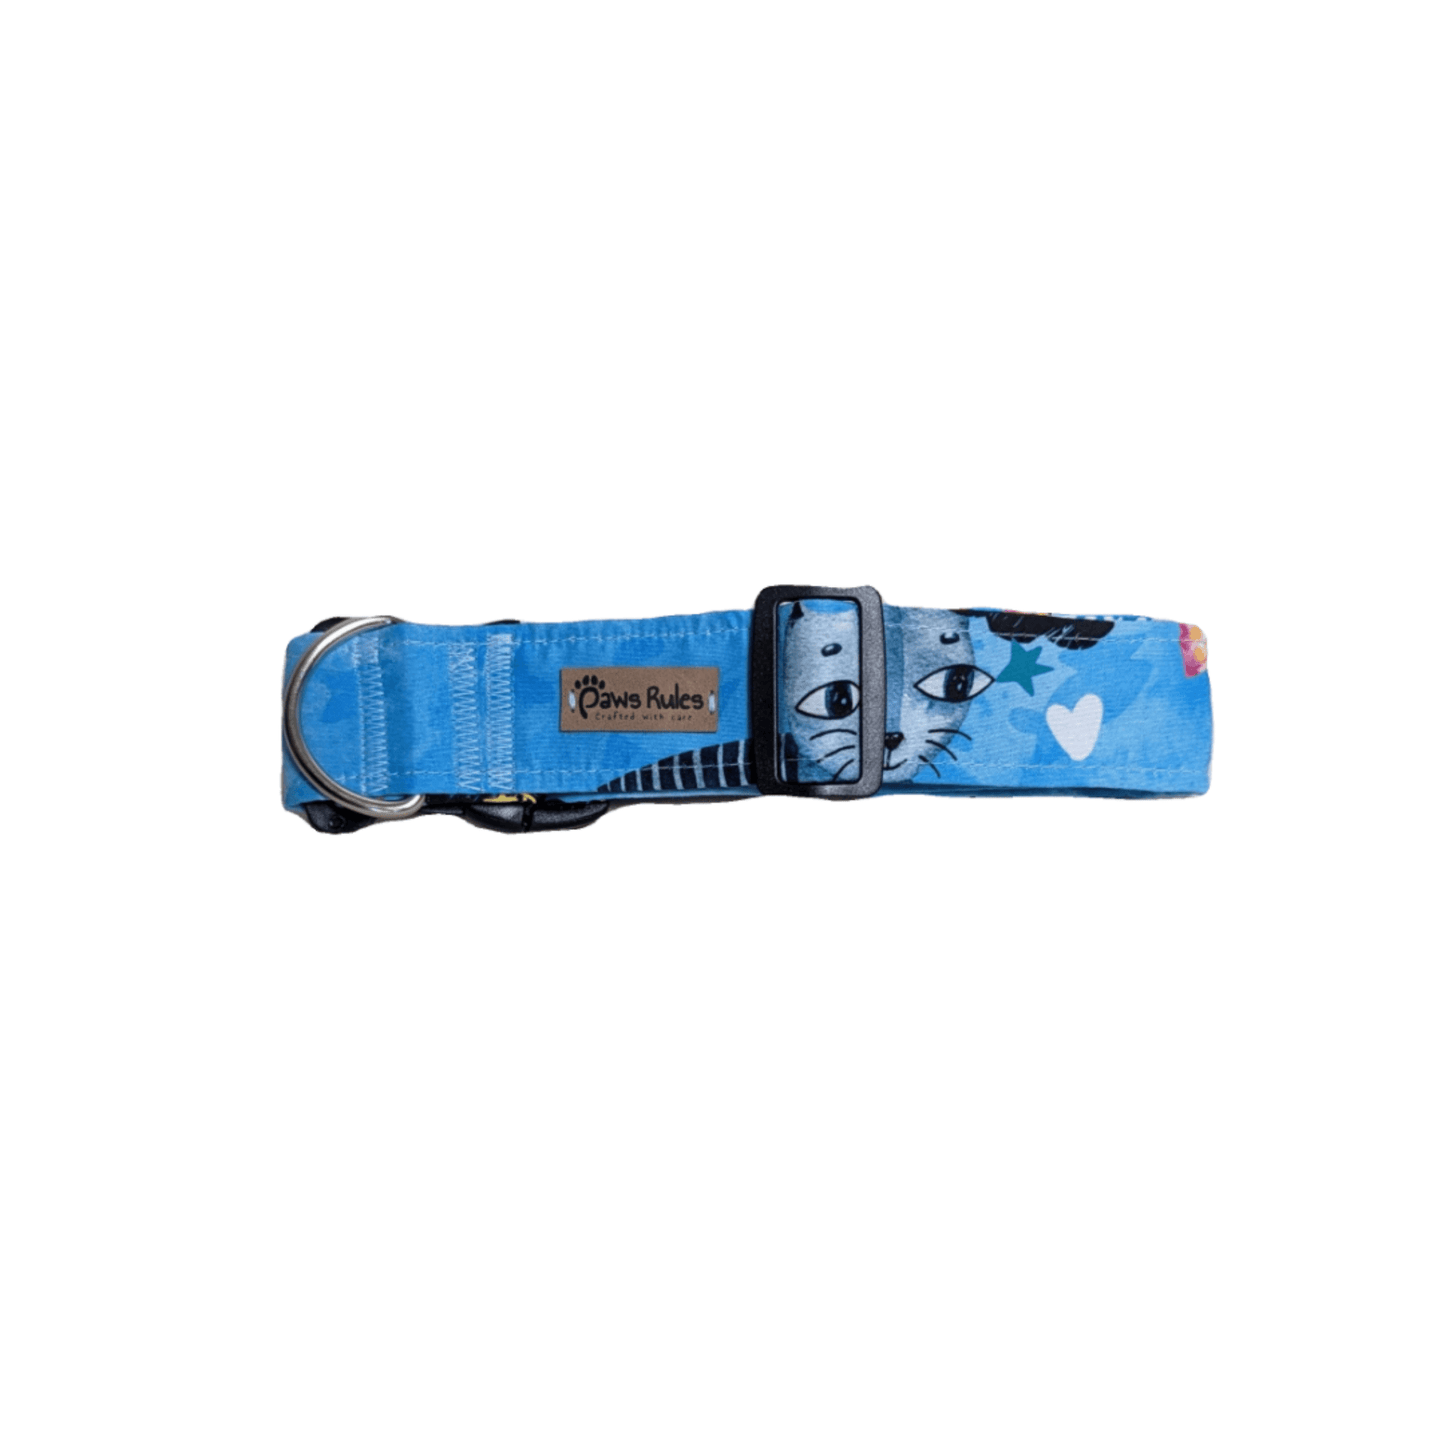 Blue Cat Silhouette Dog Collar - Enhance your dog's look with this delightful blue collar featuring a cute and intricate cat silhouette.